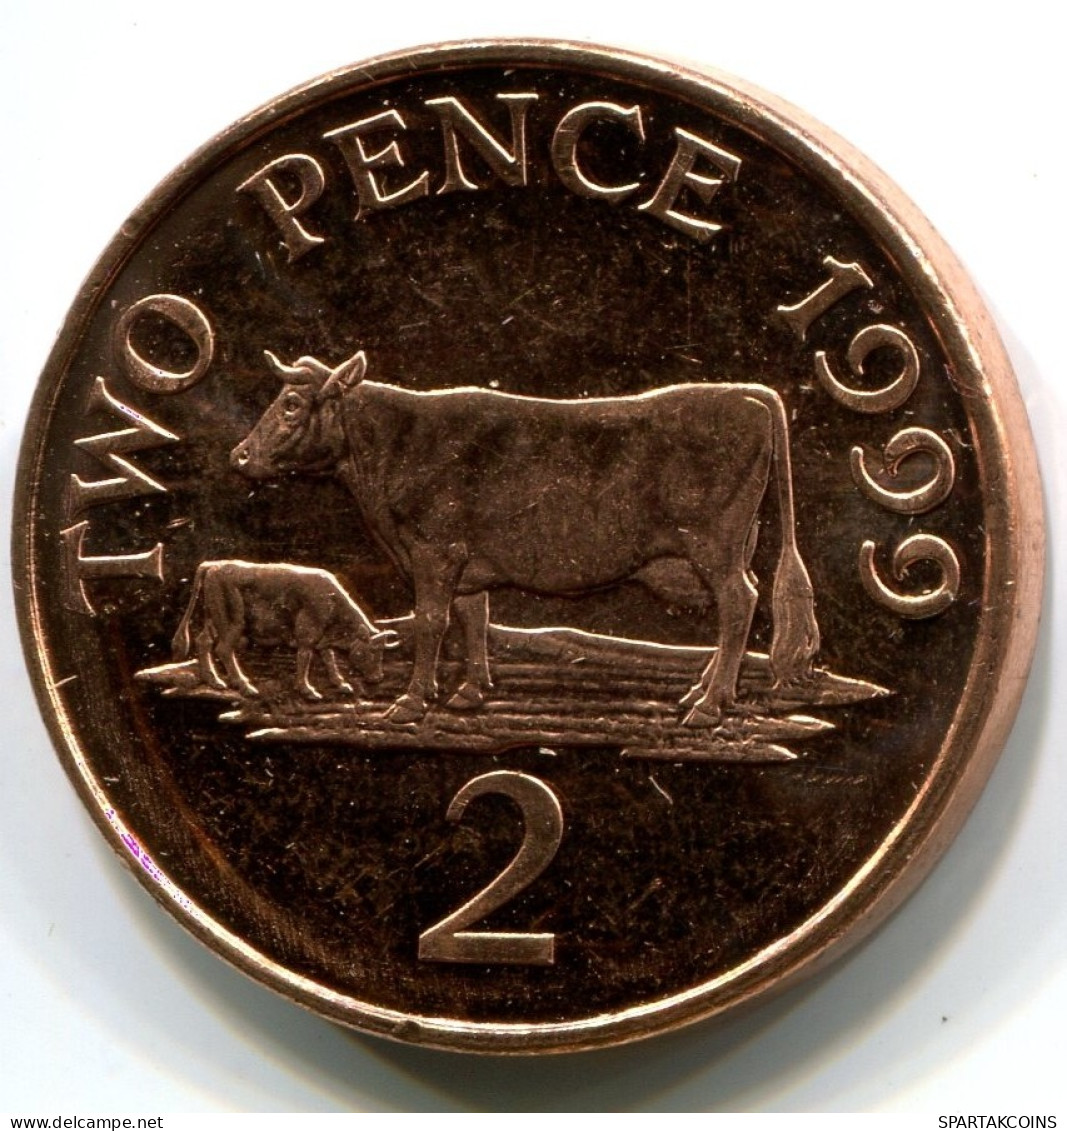 2 PENNI 1999 GUERNSEY UNC Pièce QUEEN GUERNSEY COW #W11087.F.A - Guernesey